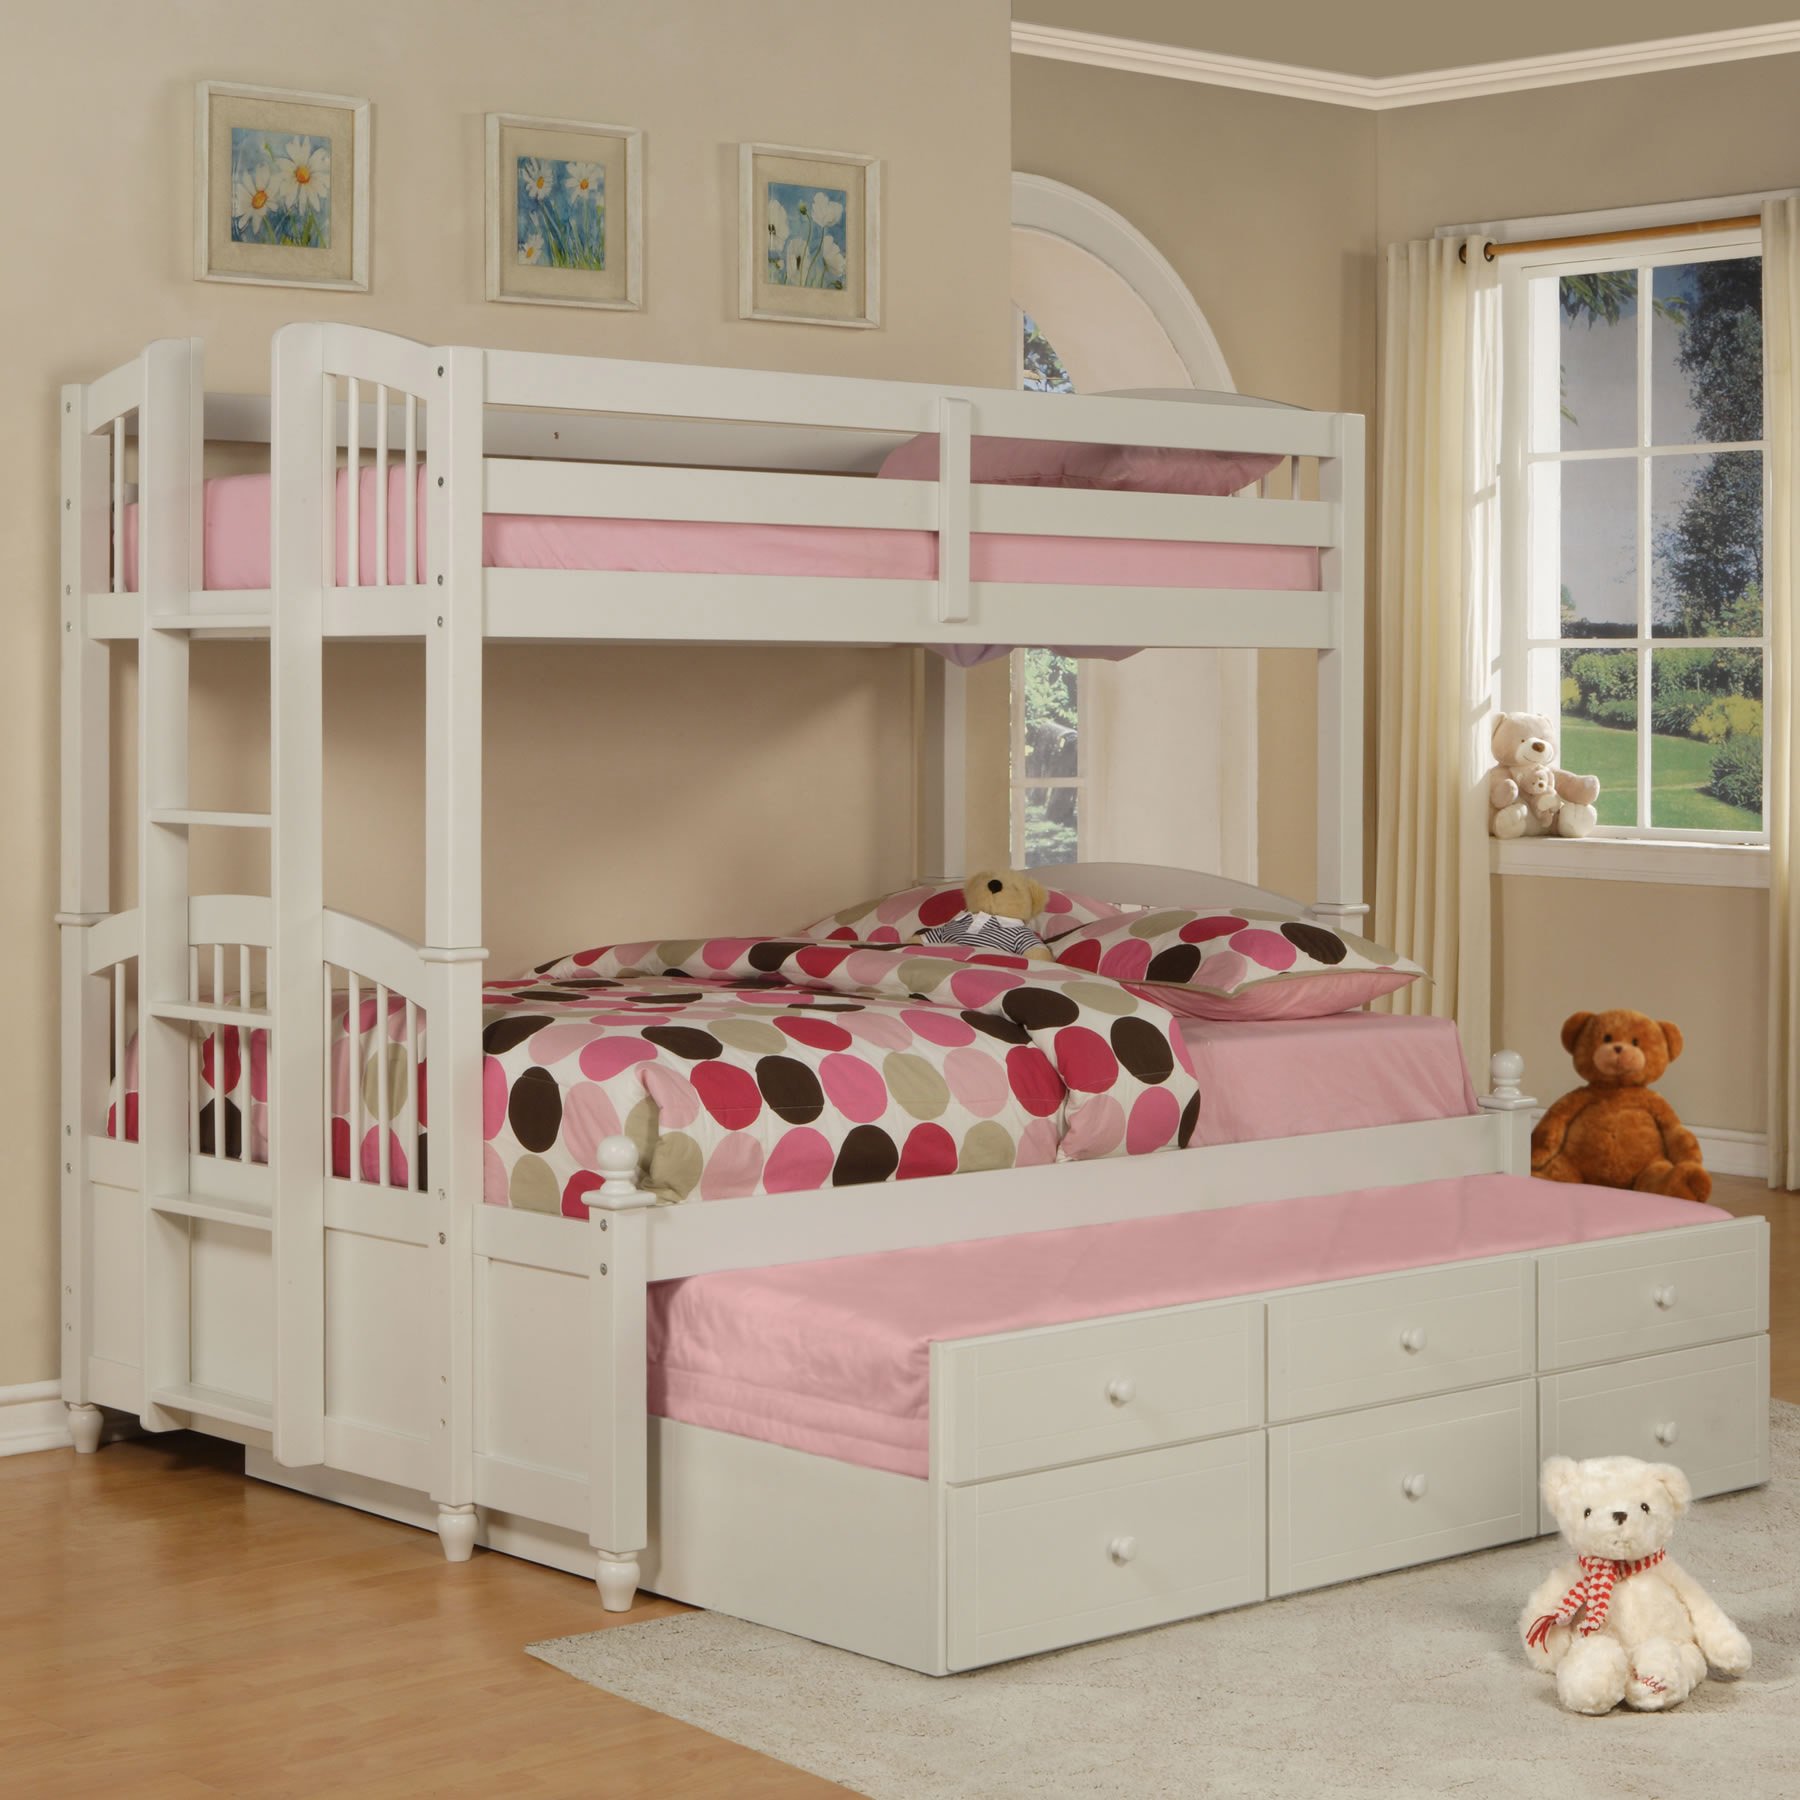 3 Bed Bunk Beds For Kids Best Ping, 3 Bed Bunk Beds For Kids